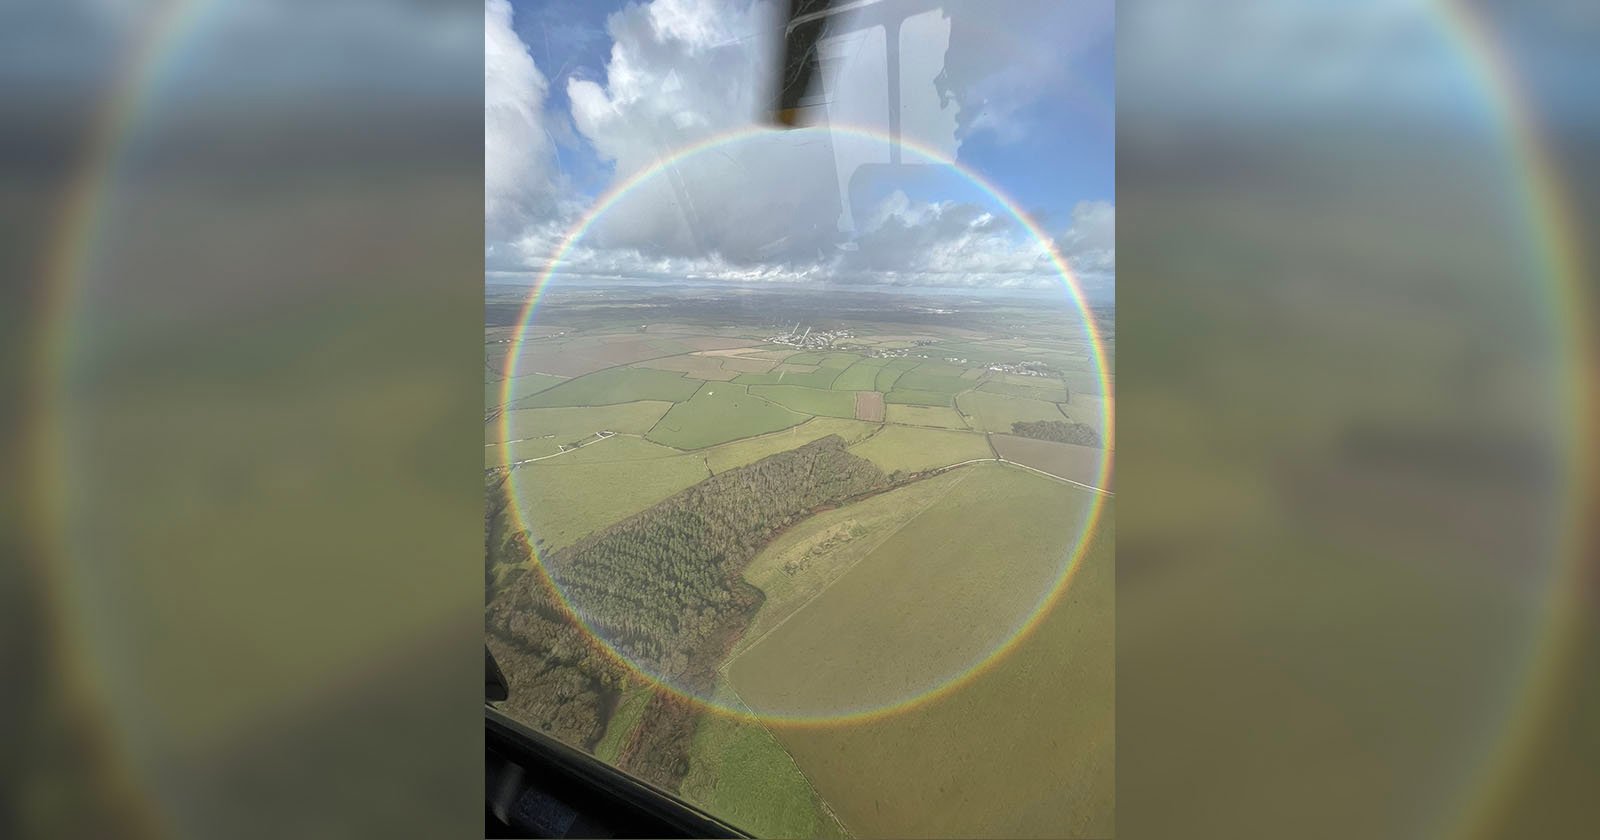 Police Helicopter Gets Close to a Rare Full-Circle Rainbow